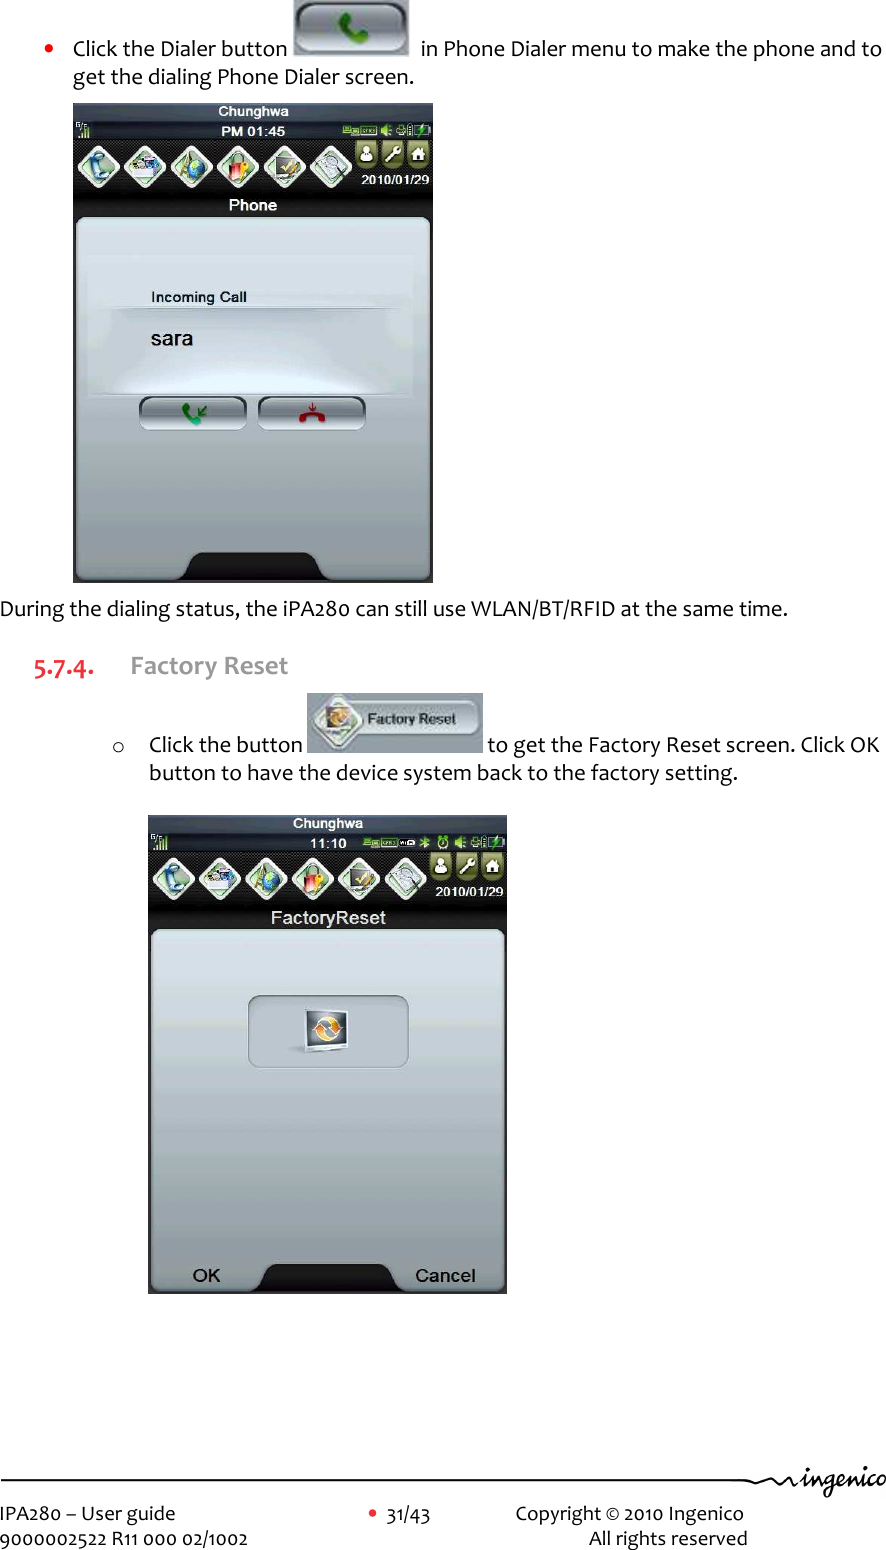     IPA280 – User guide      •  31/43    Copyright © 2010 Ingenico   9000002522 R11 000 02/1002          All rights reserved         • Click the Dialer button    in Phone Dialer menu to make the phone and to get the dialing Phone Dialer screen.  During the dialing status, the iPA280 can still use WLAN/BT/RFID at the same time. 5.7.4. Factory Reset o Click the button   to get the Factory Reset screen. Click OK button to have the device system back to the factory setting.    